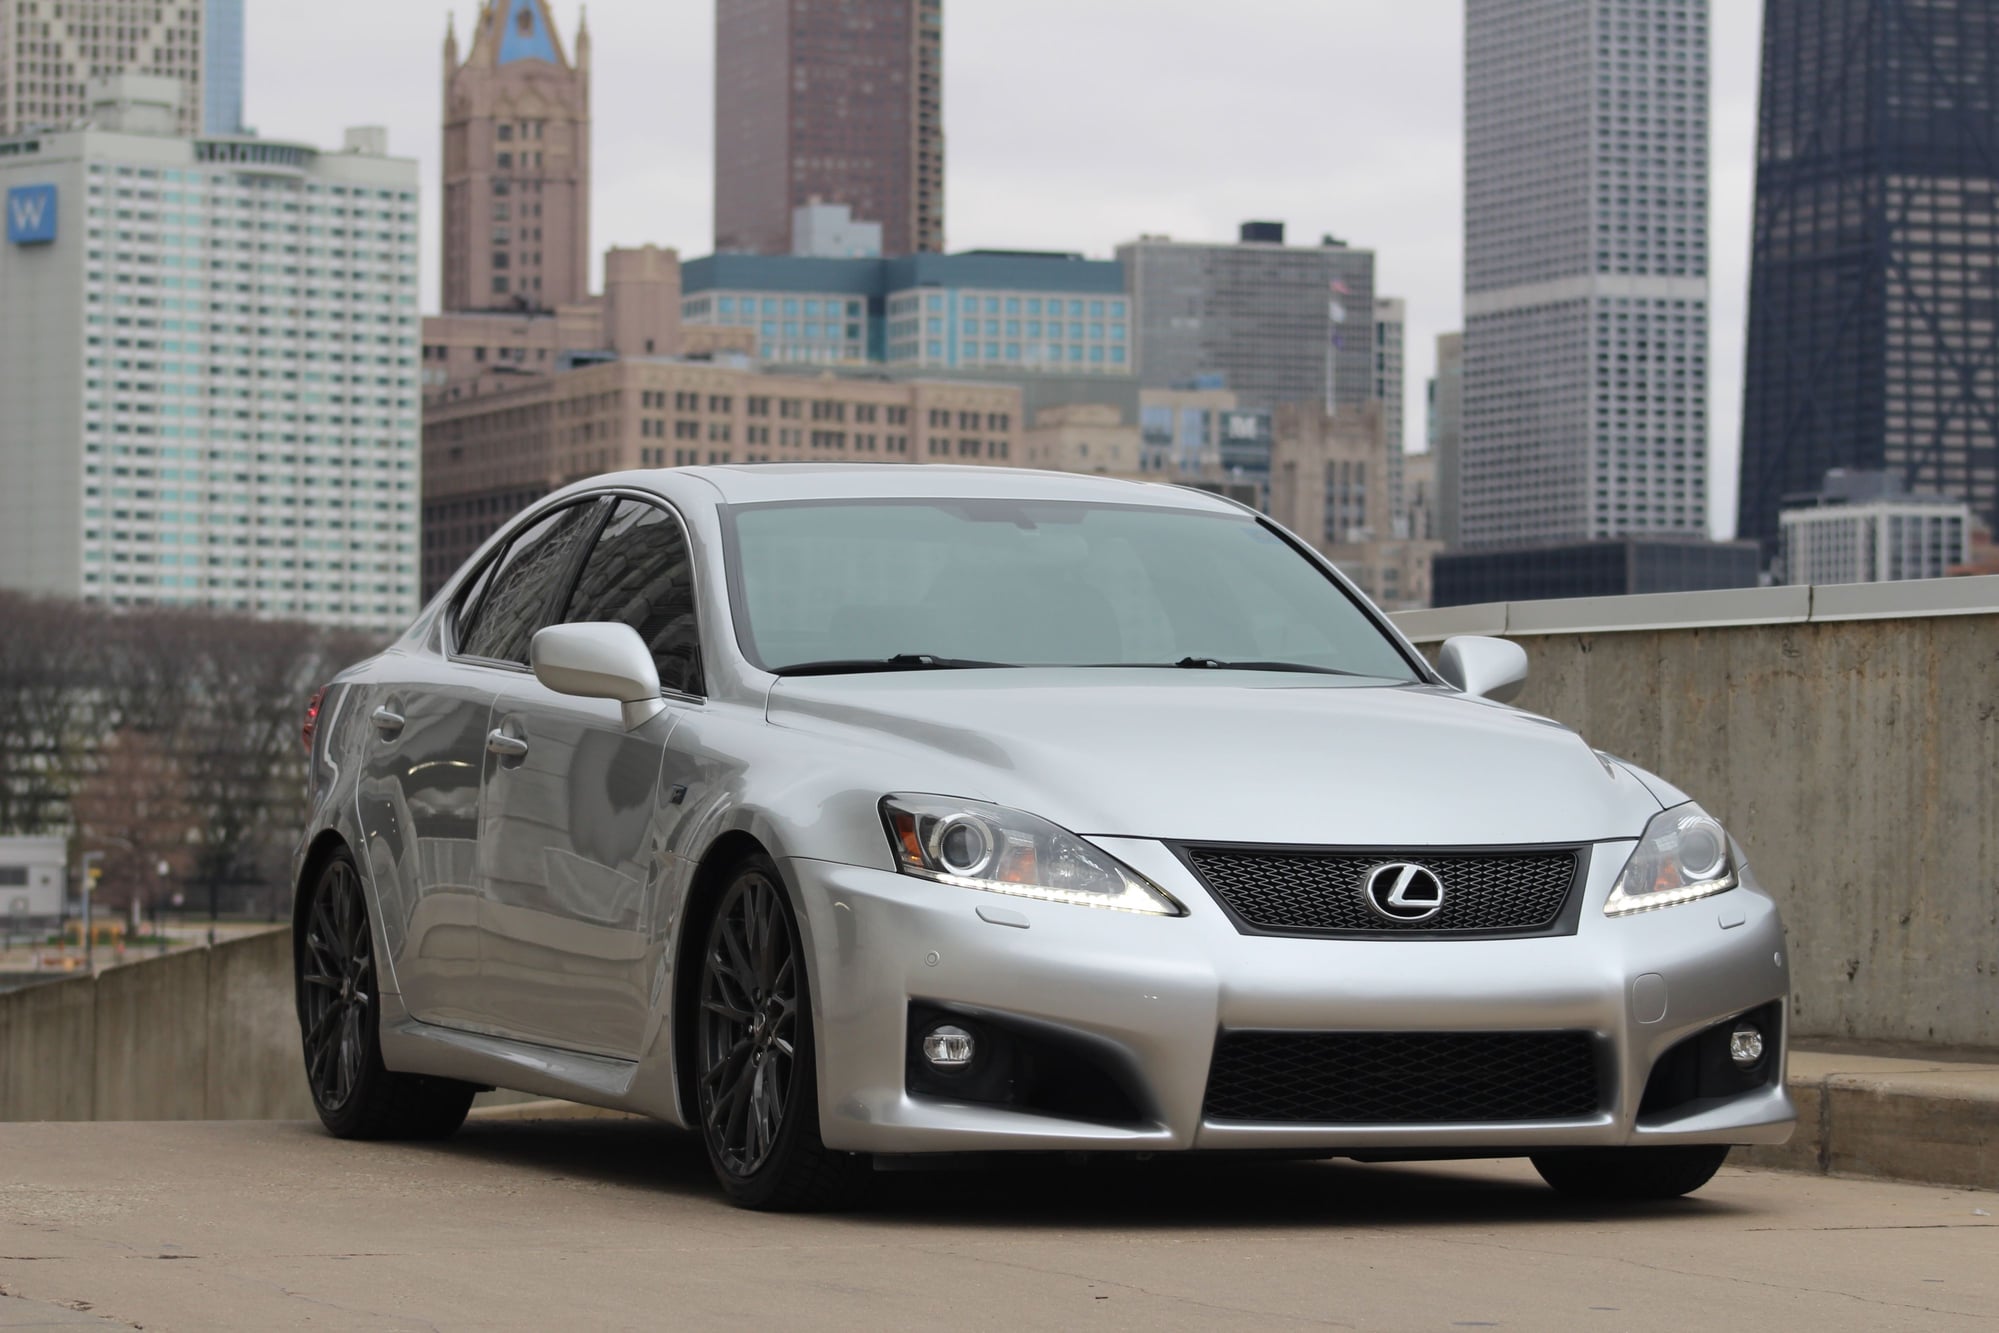 2008 Lexus IS F - Immaculate 2008 Lexus ISF - $29,975 - Used - Chi, IL 60657, United States